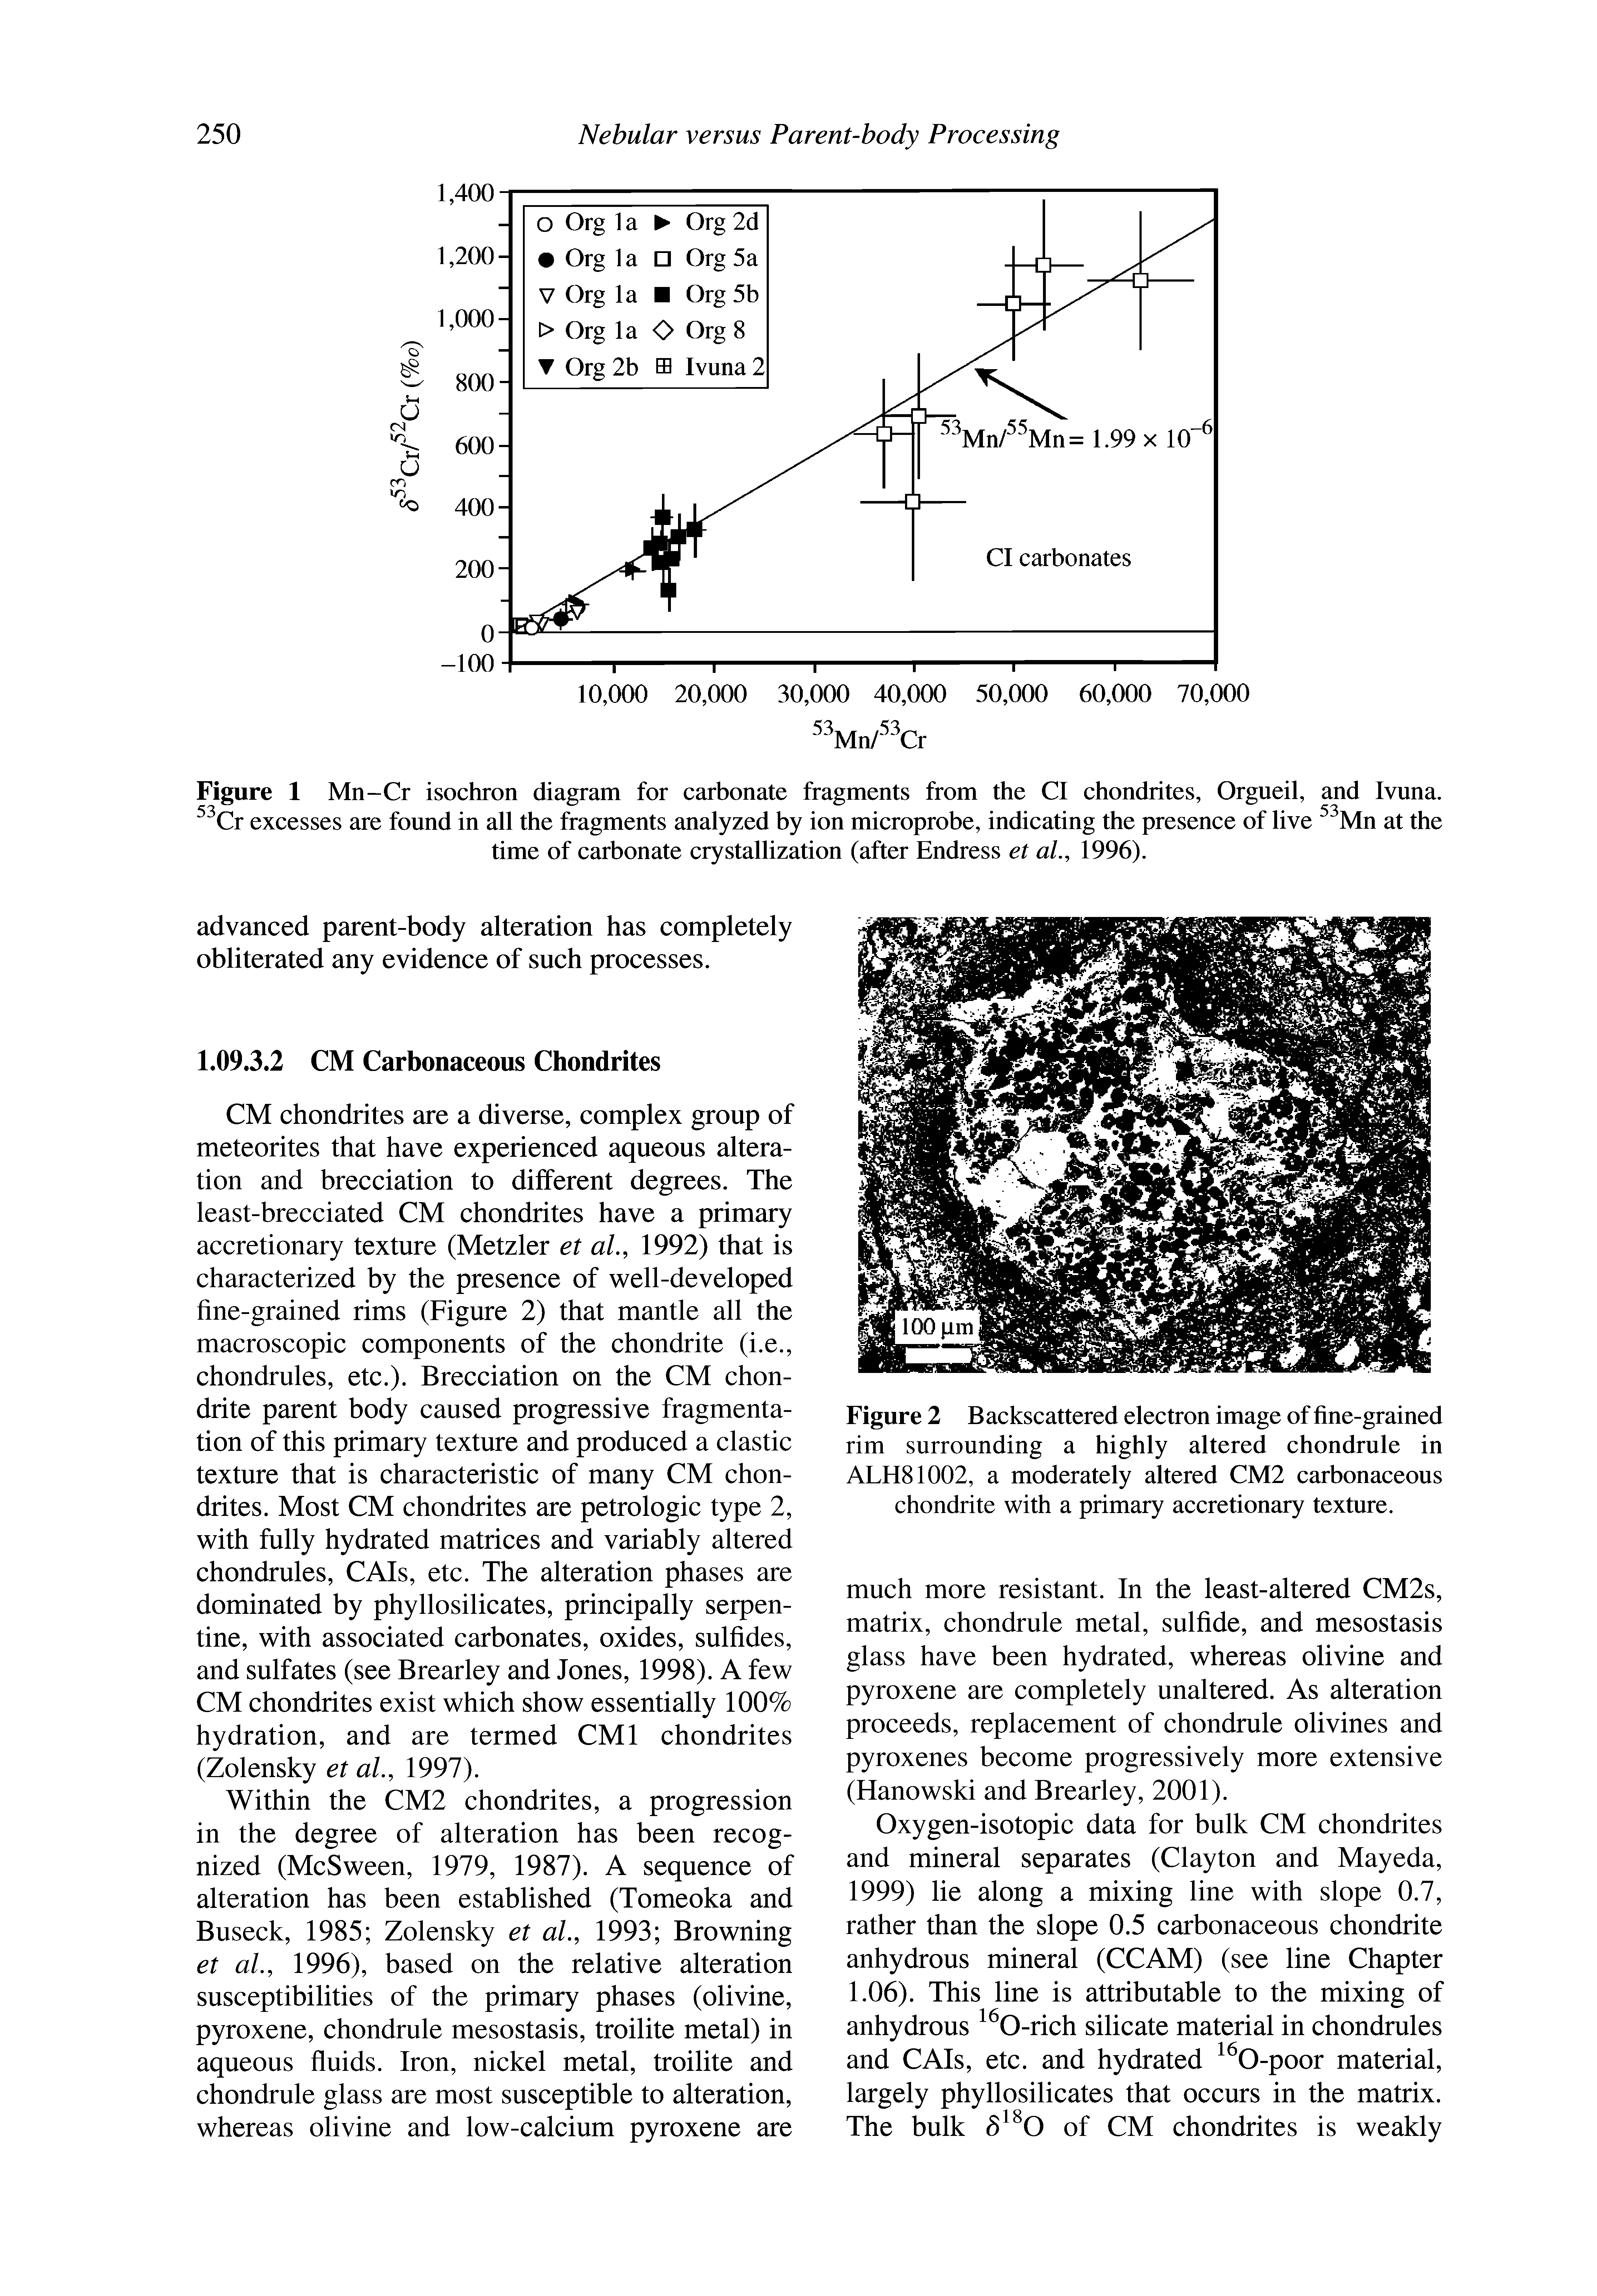 Figure 1 Mn-Cr isochron diagram for carbonate fragments from the Cl chondrites, Orgueil, and Ivuna. Cr excesses are found in all the fragments analyzed by ion microprobe, indicating the presence of live Mn at the time of carbonate crystallization (after Endress et aL, 1996).